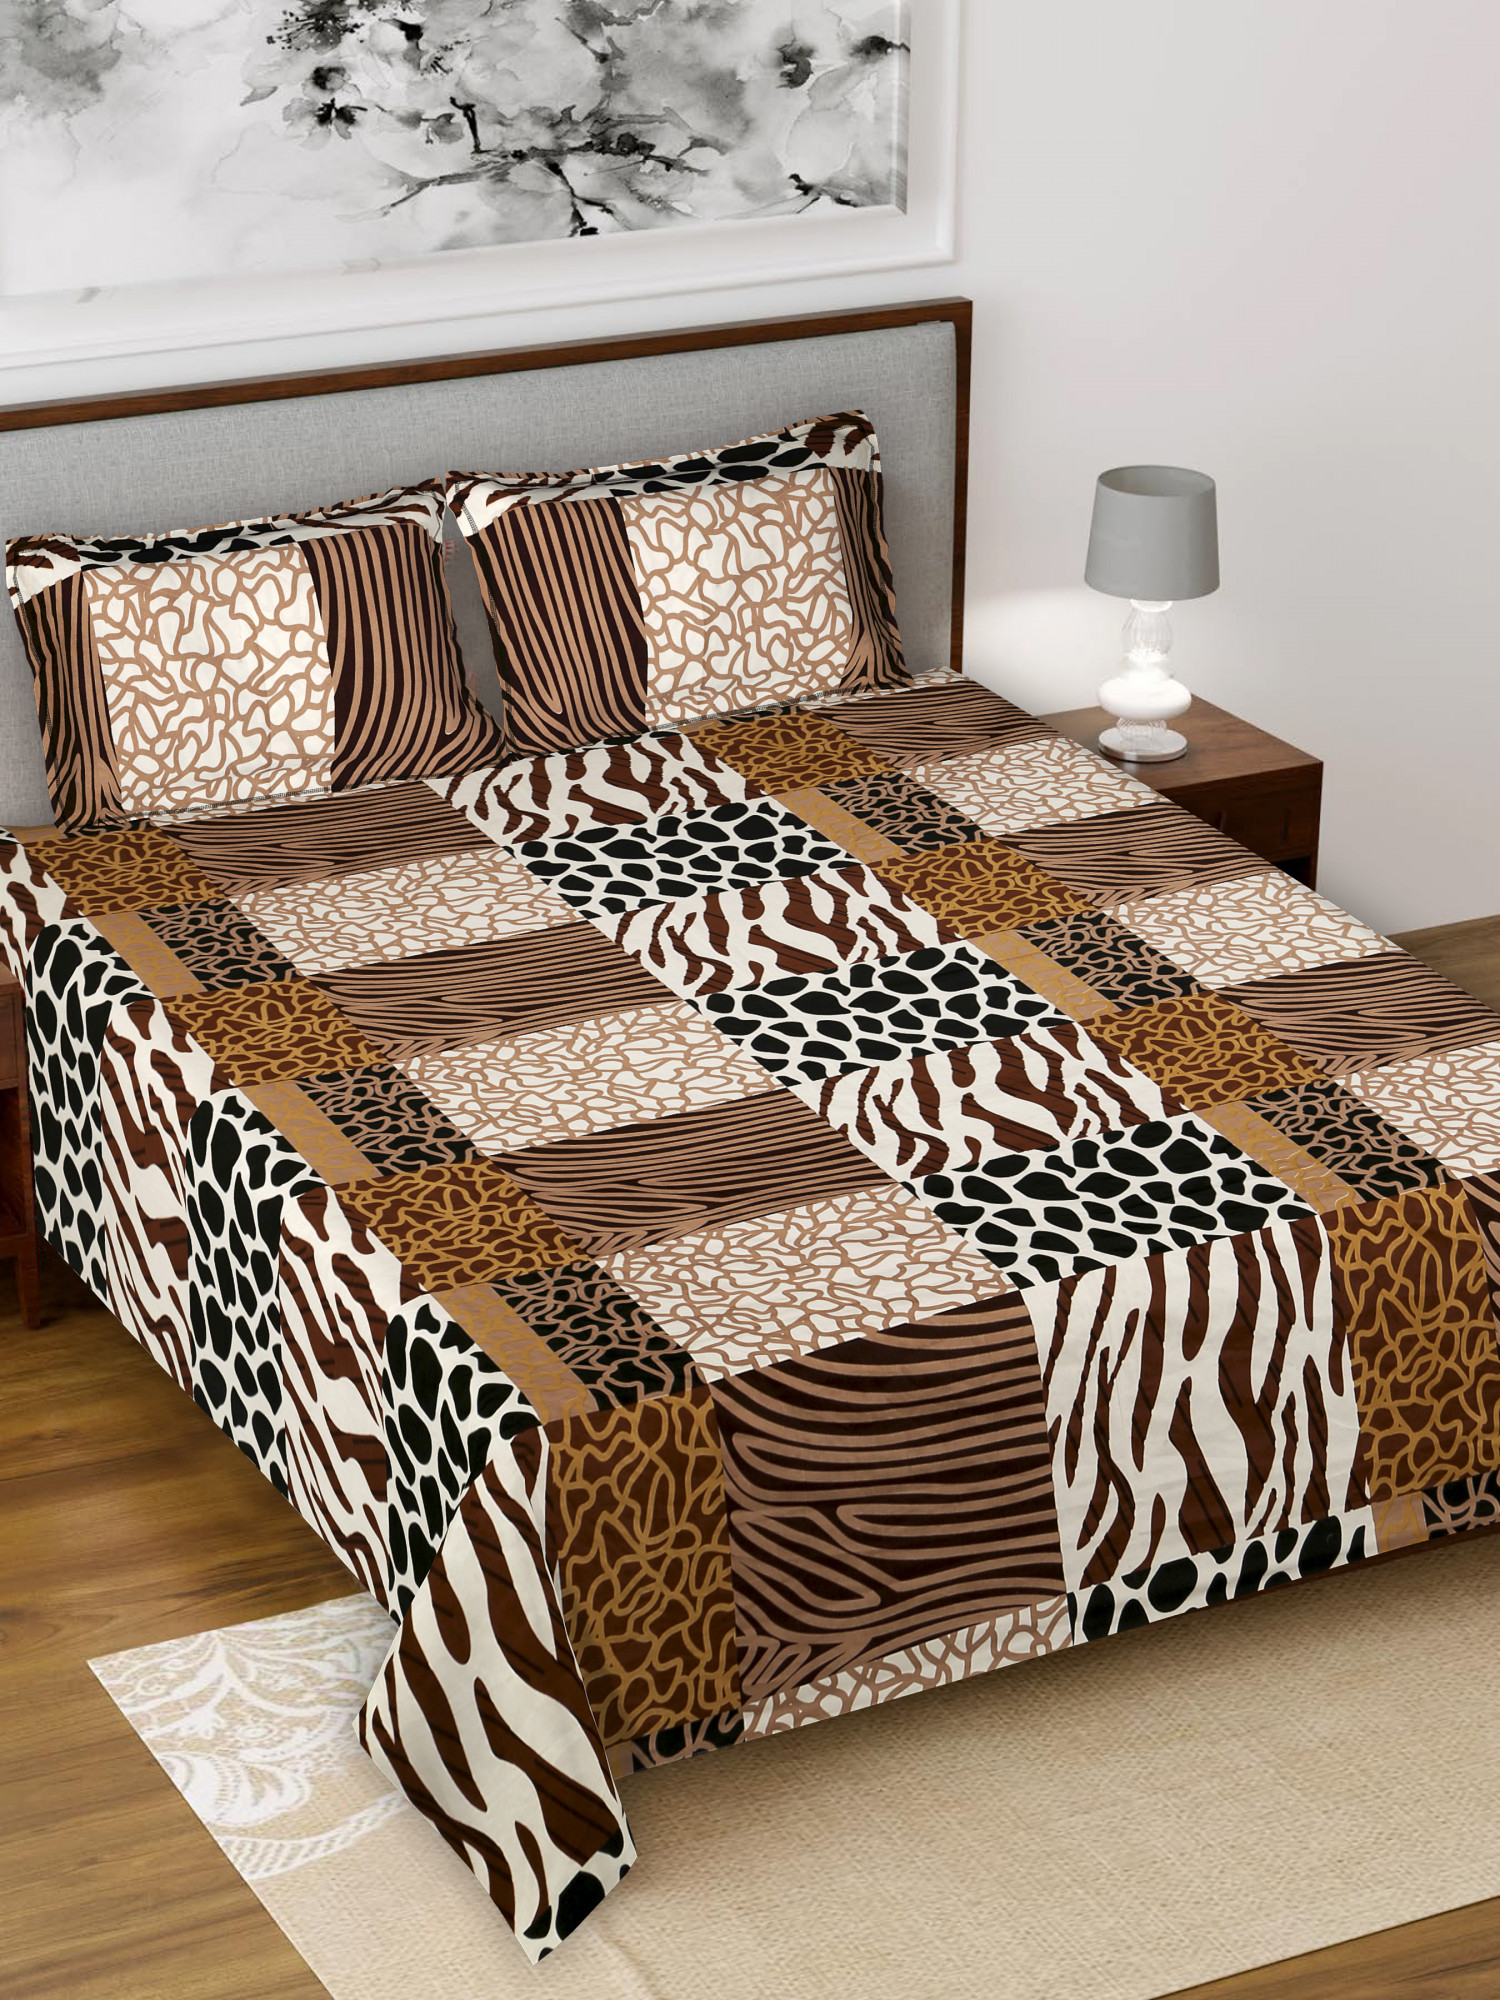 Kuber Industries Stone Print Glace Cotton 144 TC King Size Double Bedsheet with 2 Pillow Covers (Black & Brown)